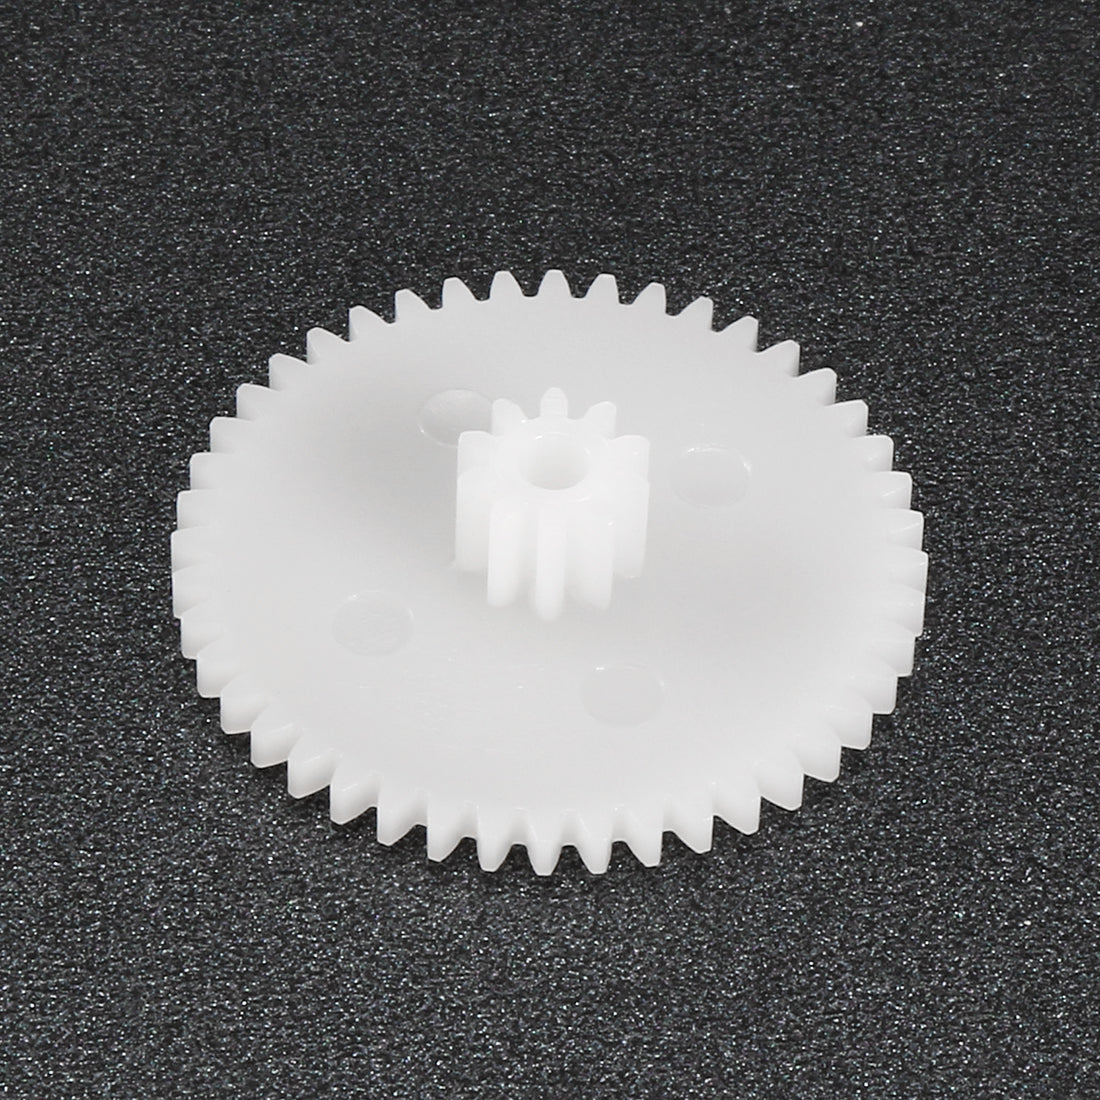 uxcell Uxcell 10Pcs 40102B Plastic Gear Accessories with 40 Teeth for DIY Car Robot Motor